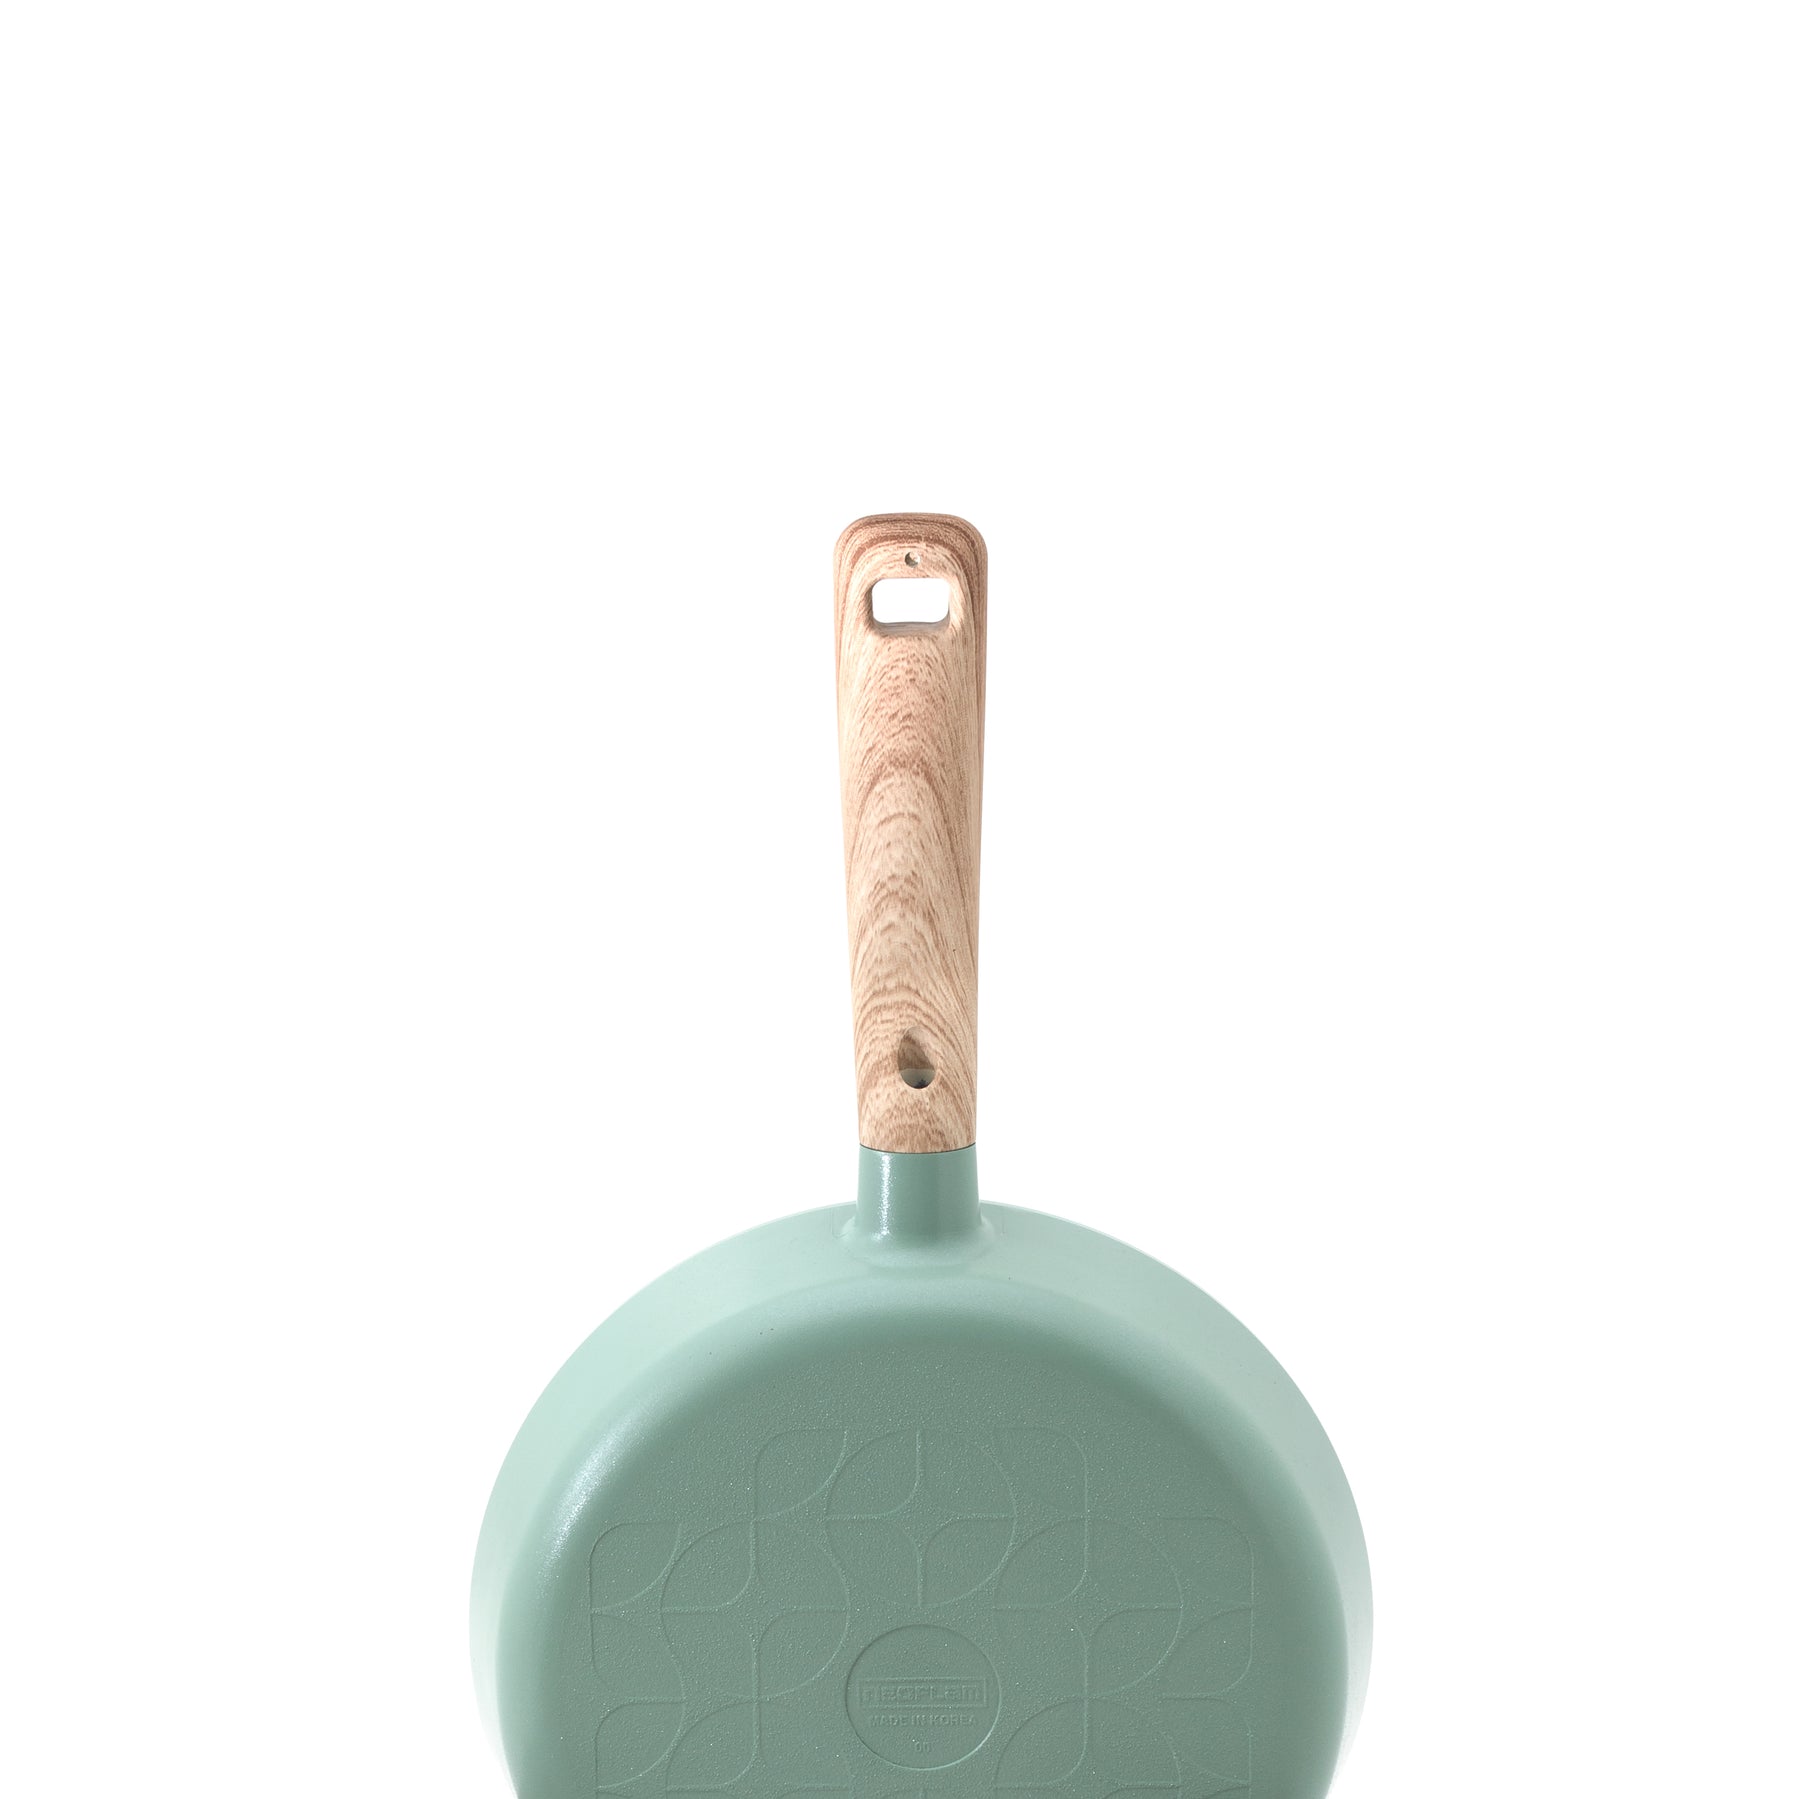 Neoflam Demer Green Retro Induction Set - 24 and 28cm Fry pans and a 26cm Chef pan